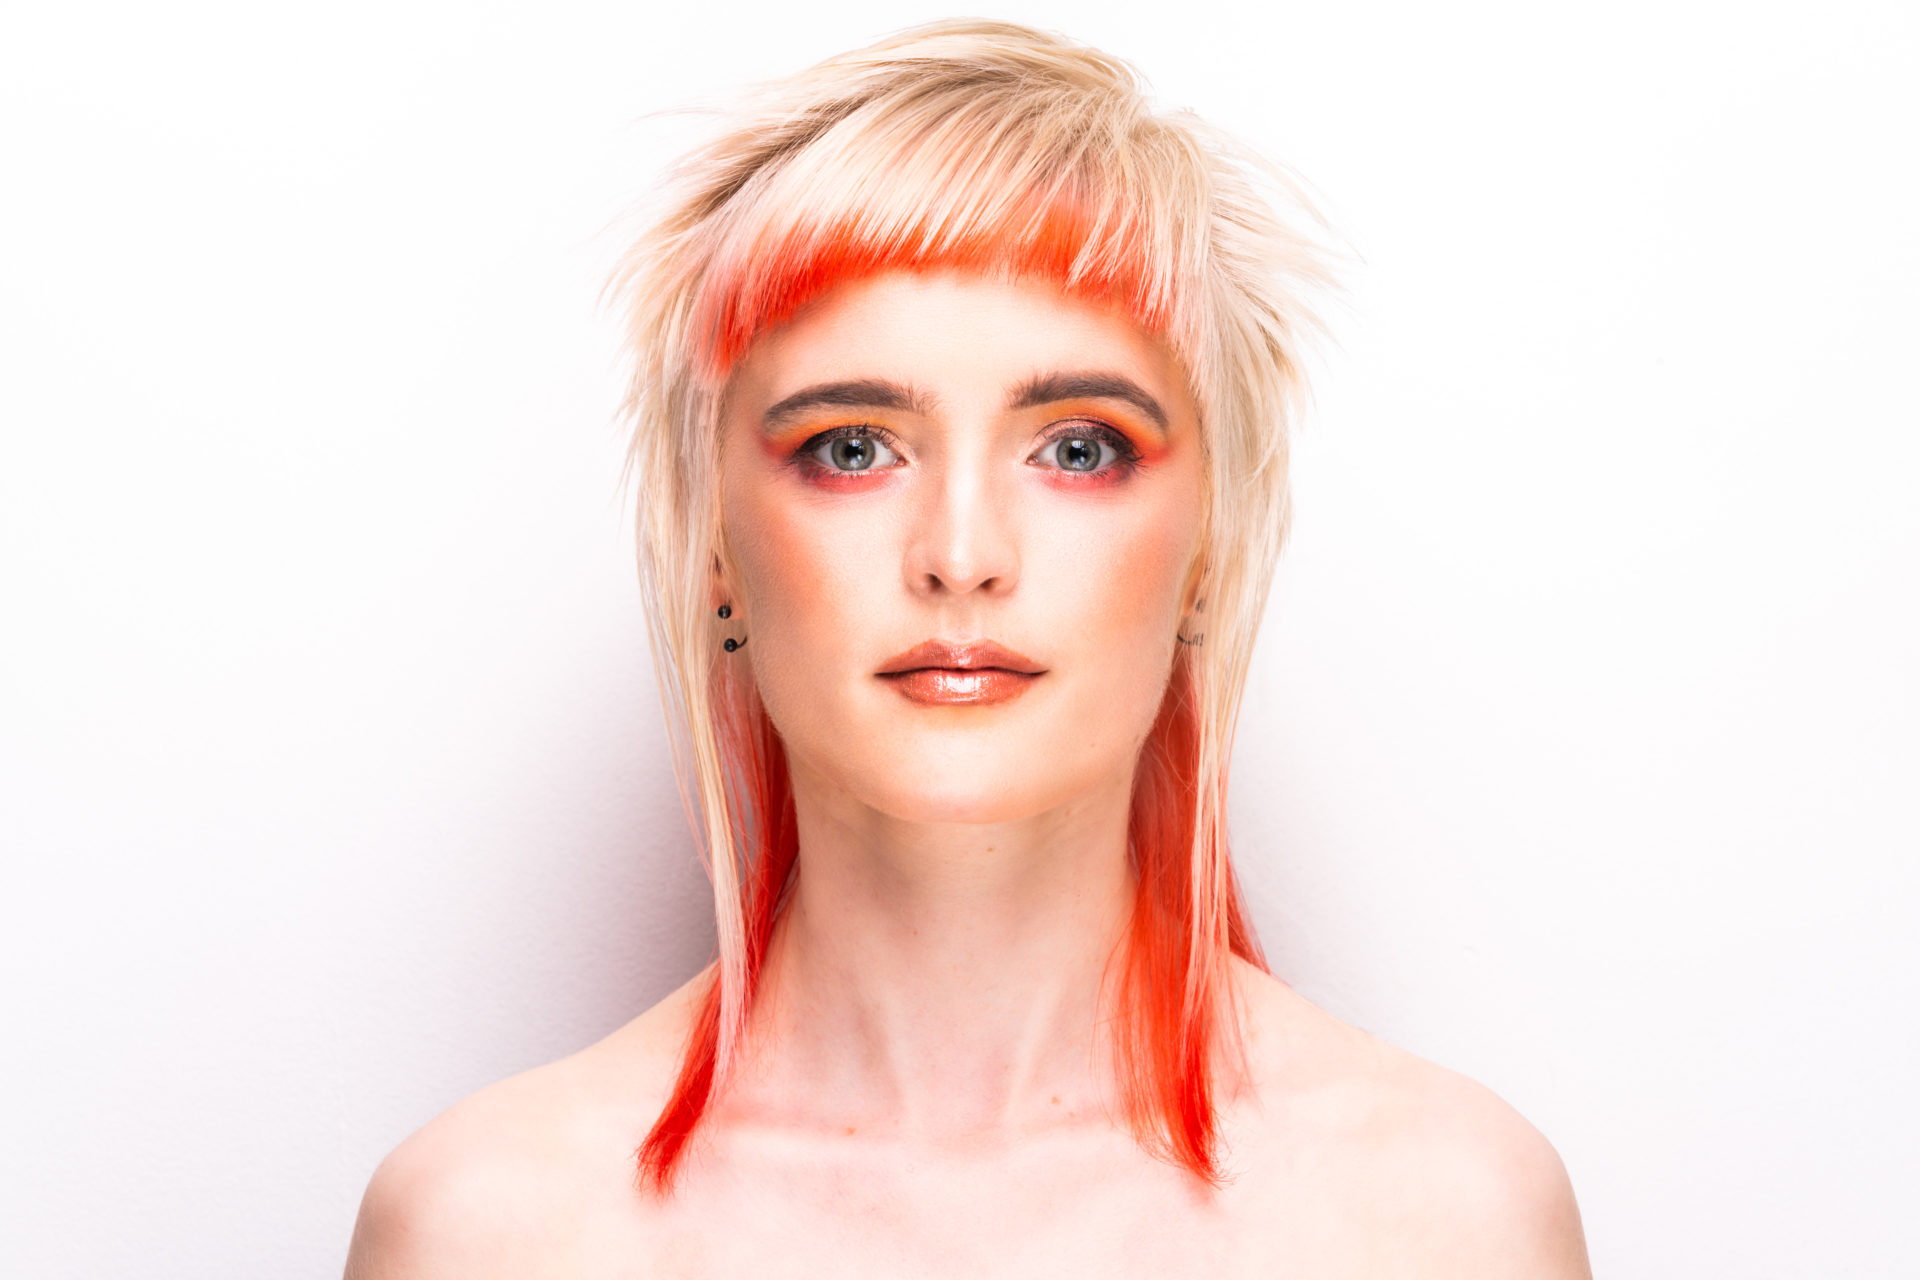 the latest hair collections from the talented & creative team at House of Colour hair salons in Dublin.